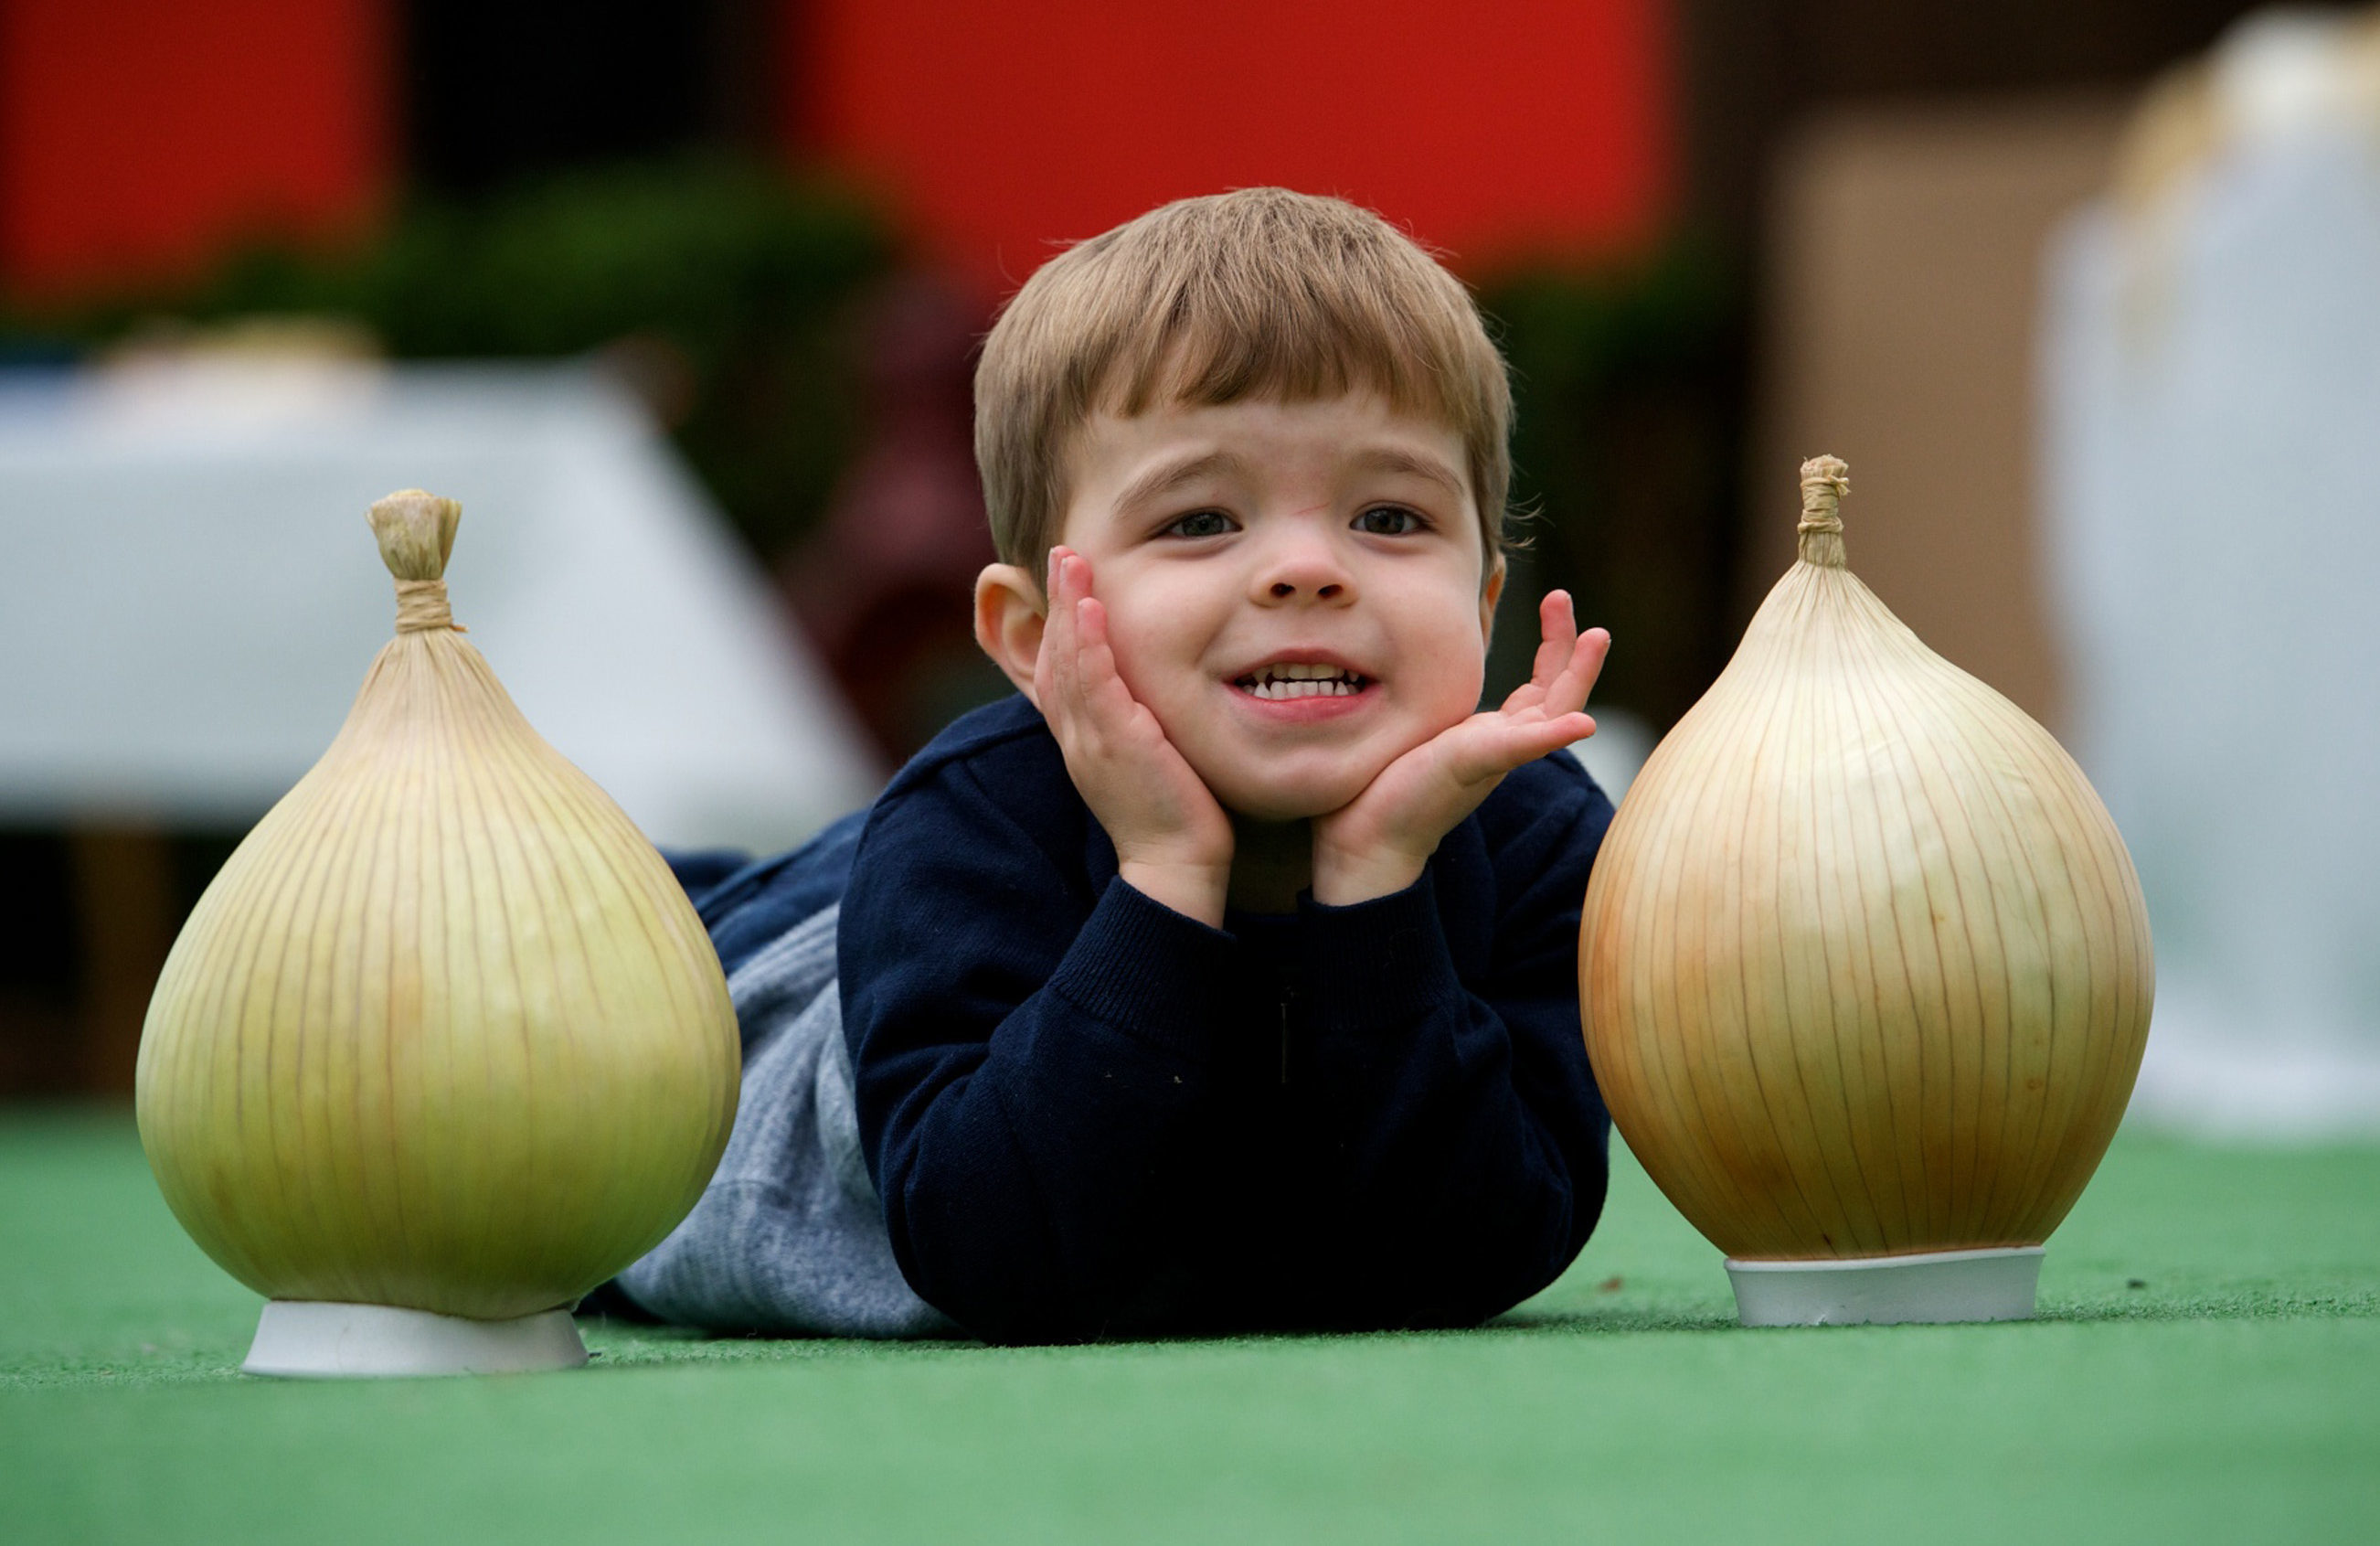 Youngster Ethan Hainey, from Inchinnan, in Renfrewshire knows his onions